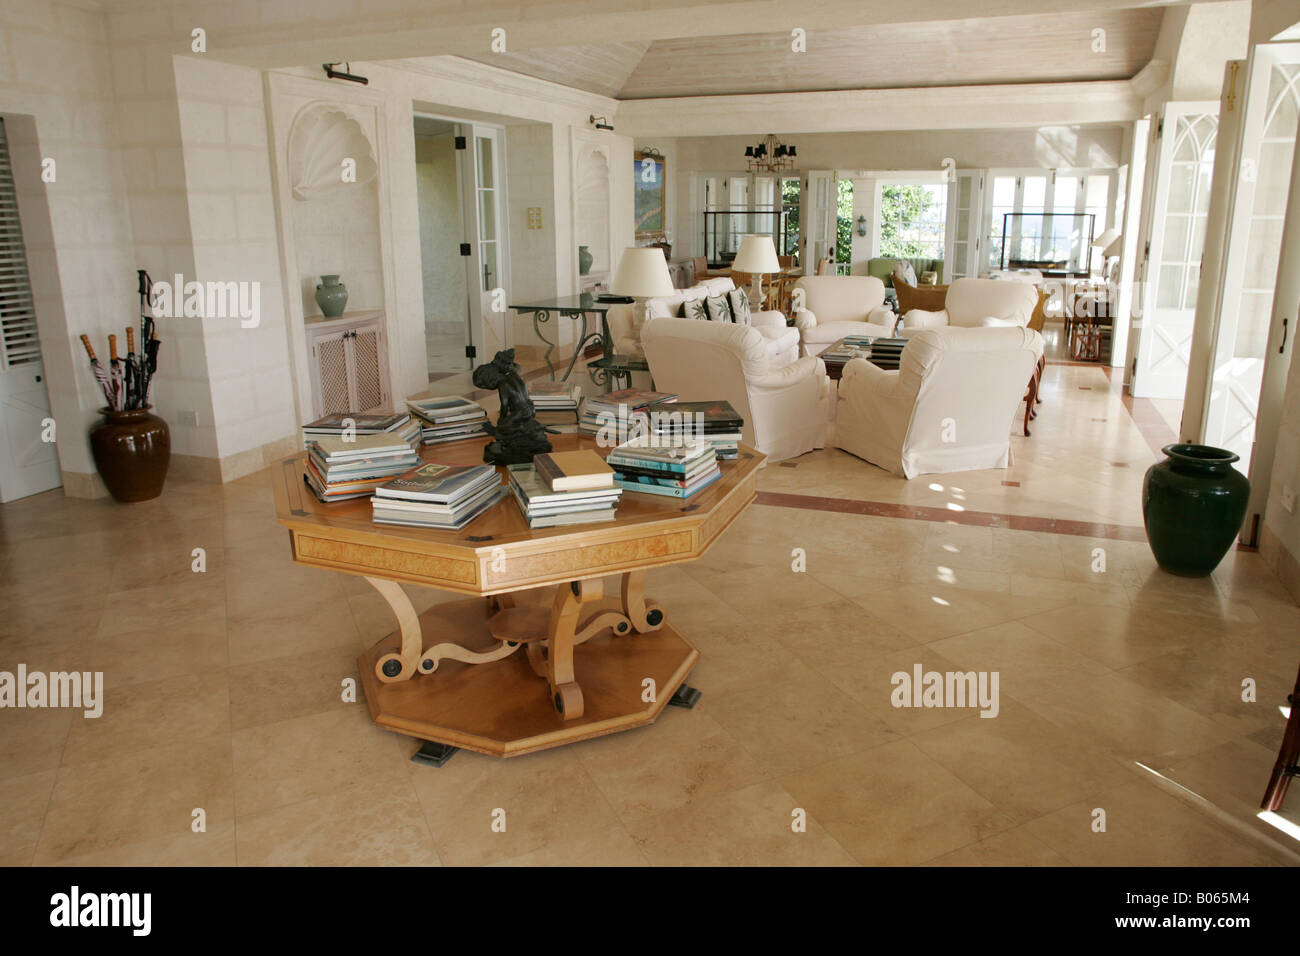 Princess Margaret's former villa, Les Jolies Eaux, on the island of Mustique, St. Vincent and the Grenadines. Stock Photo